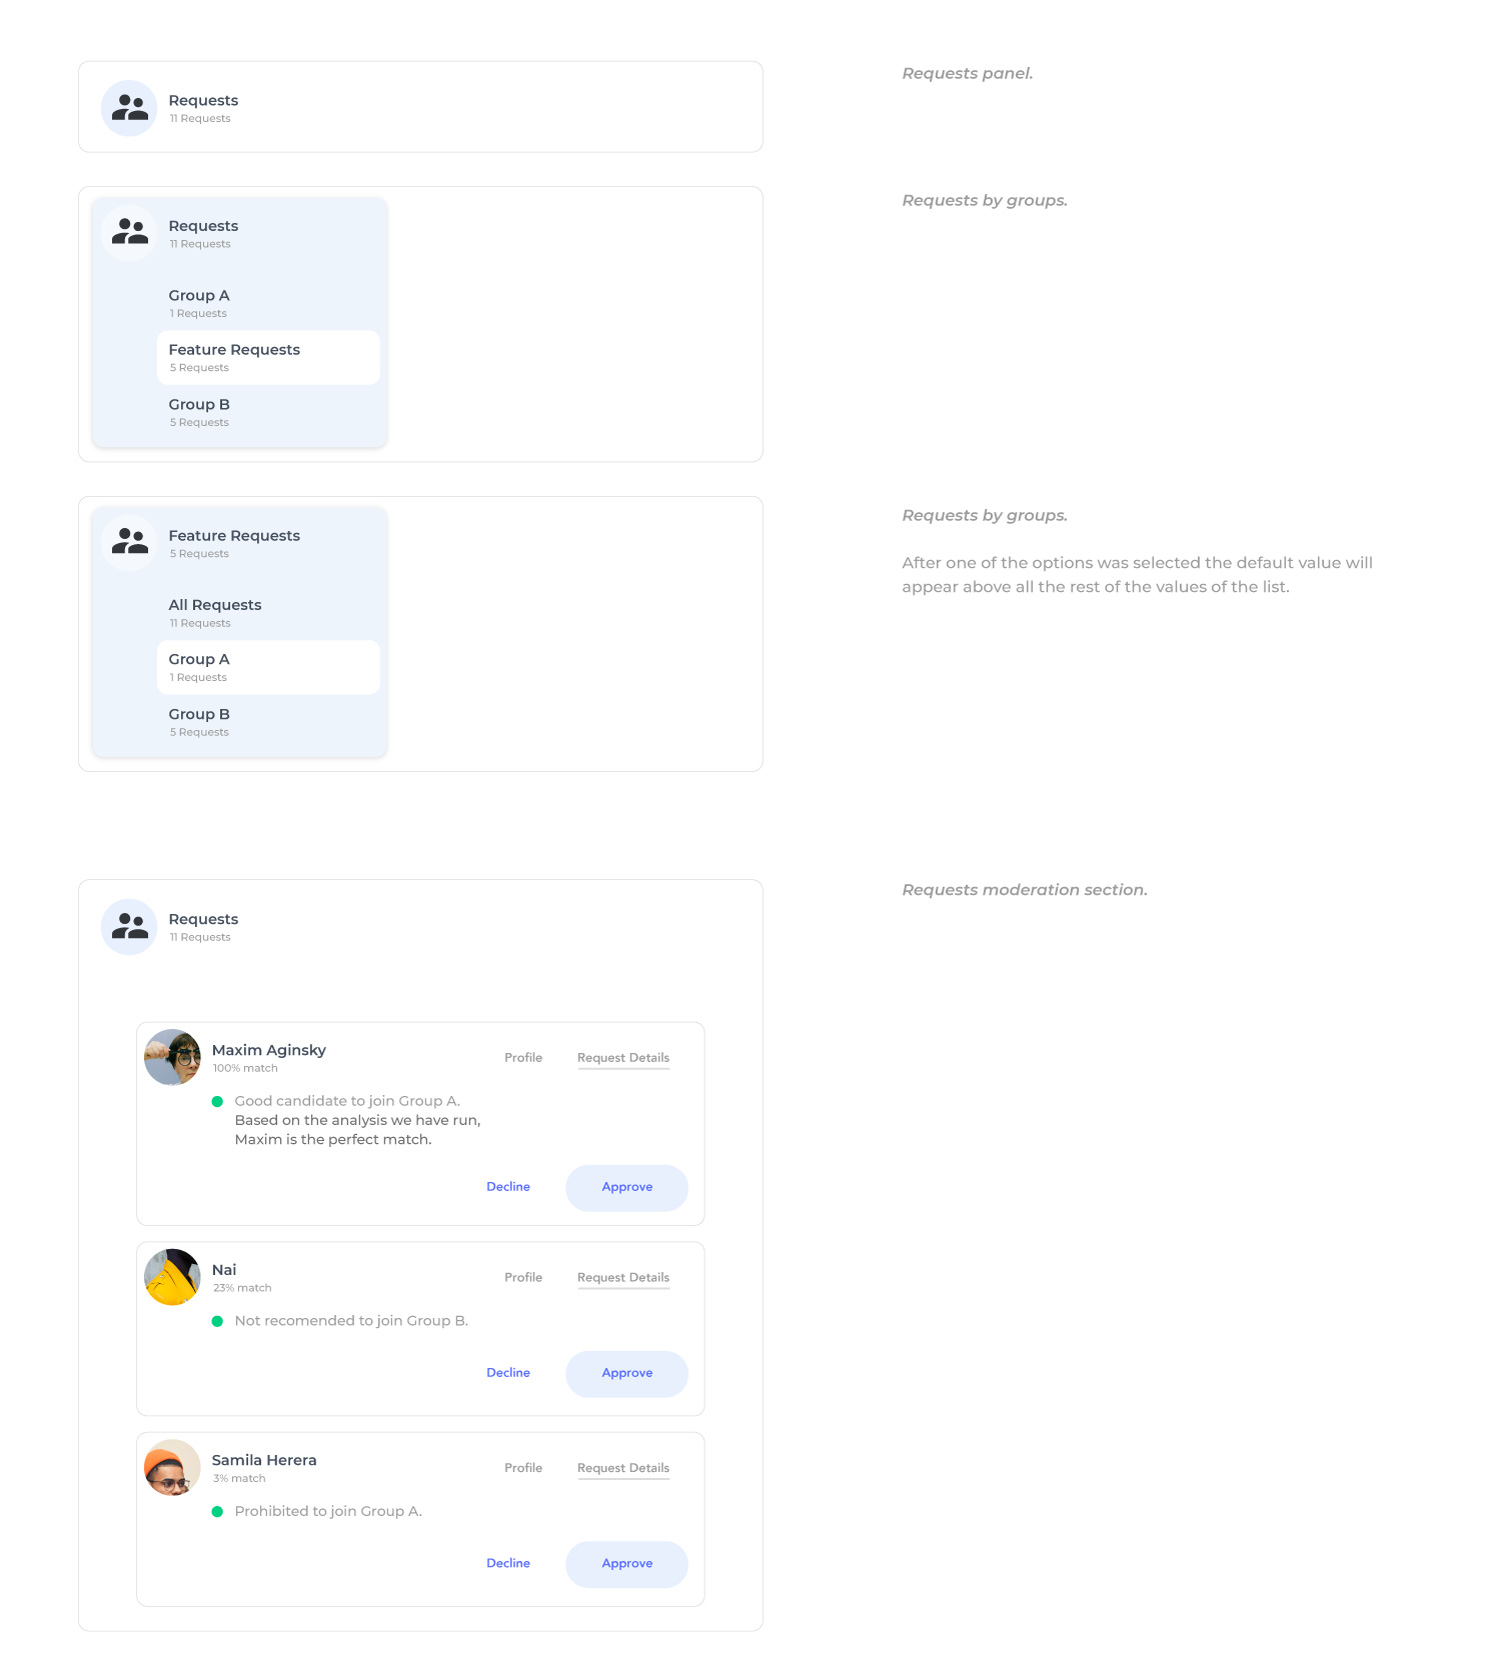 UI that will help Admins to filter posts by group and type.